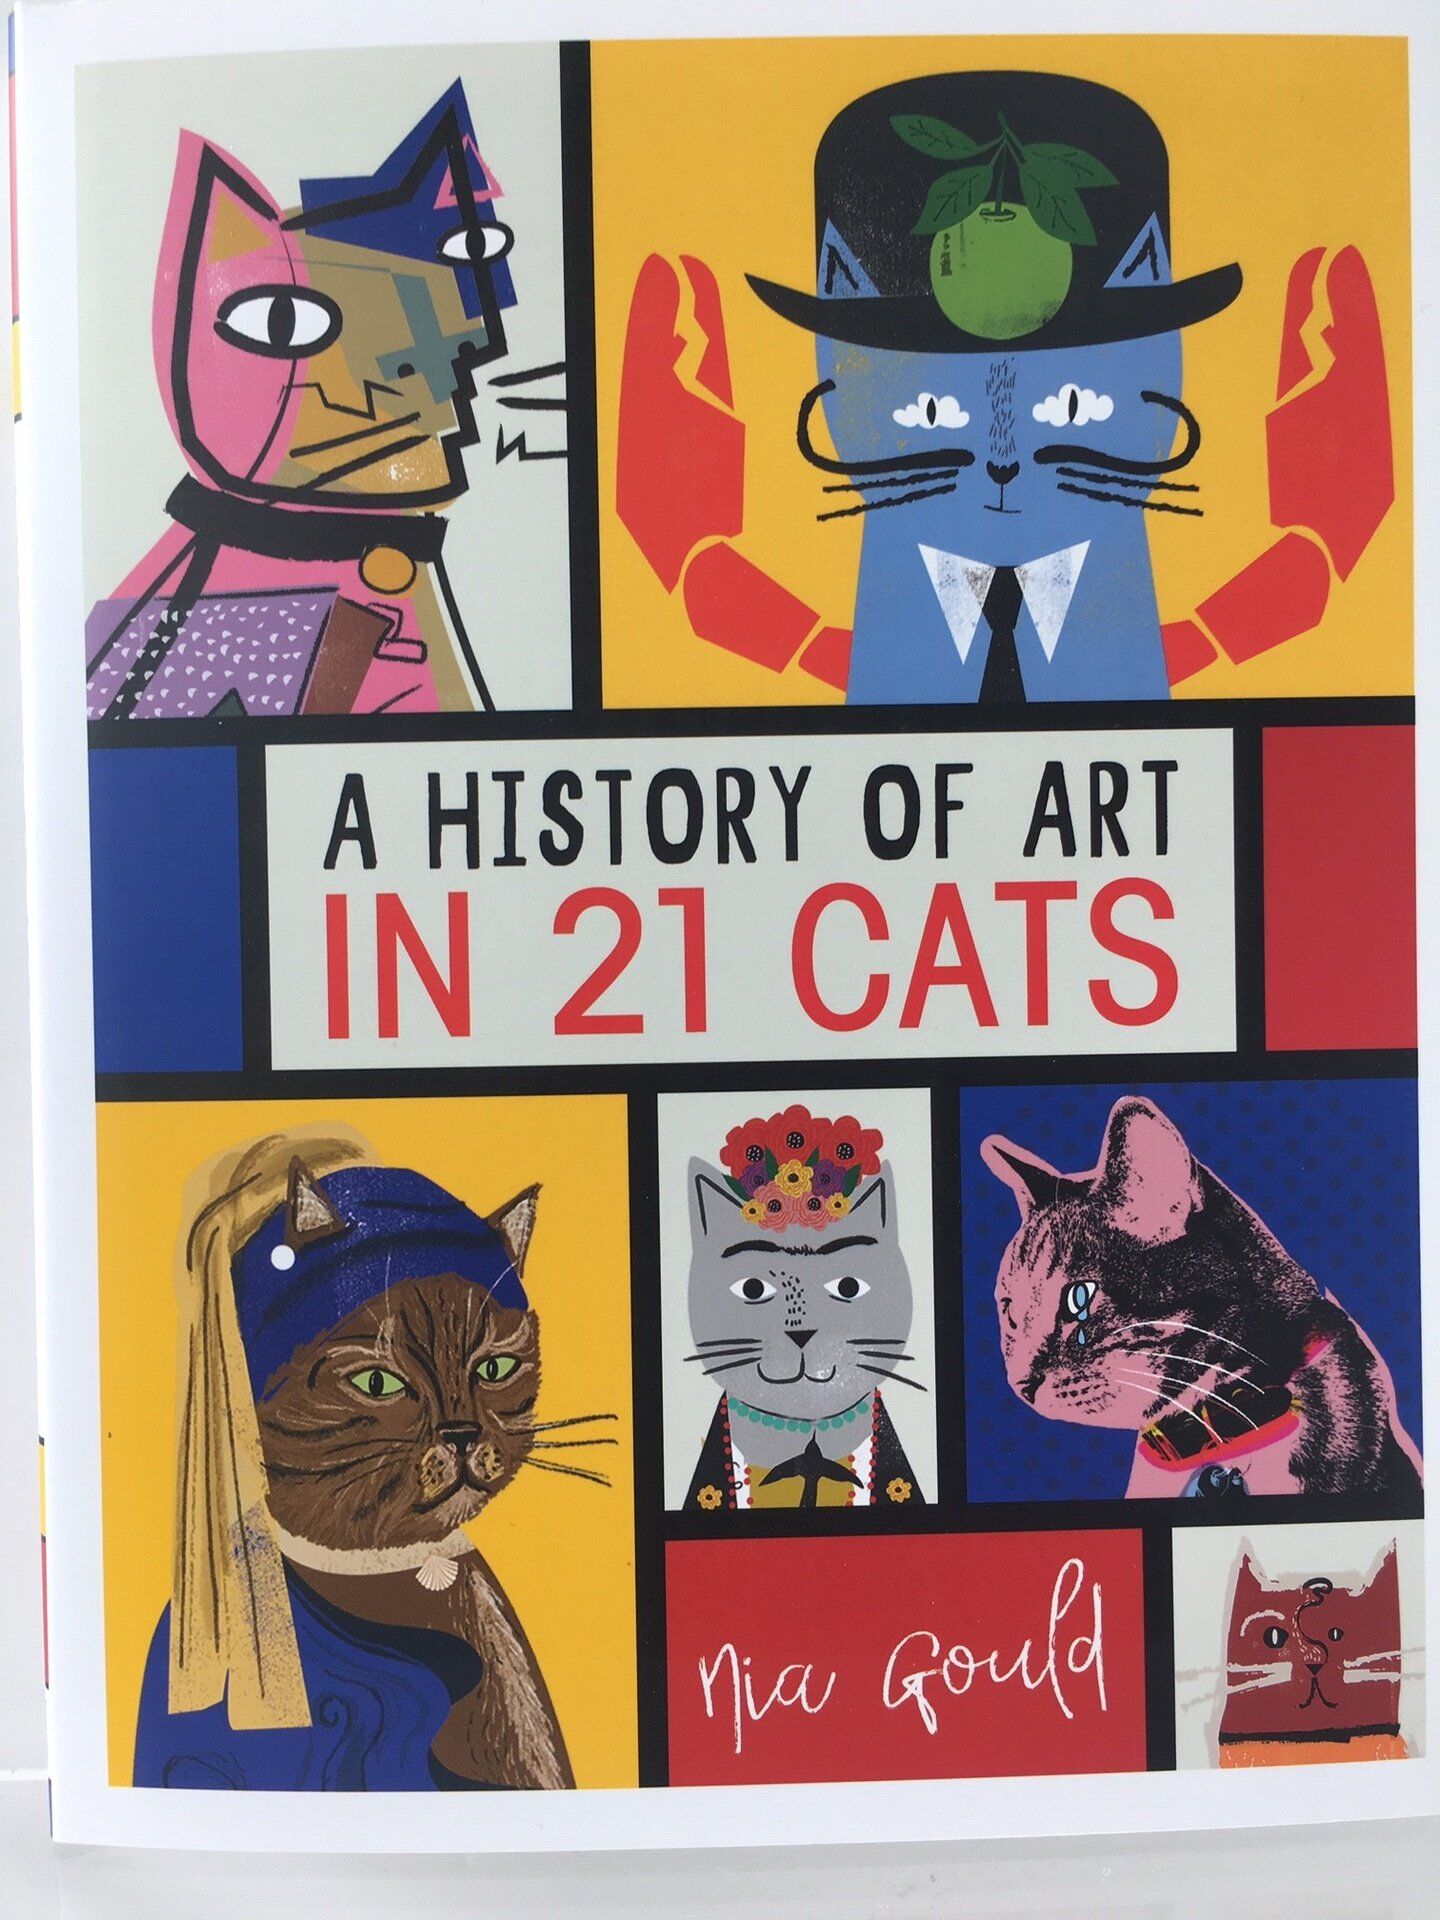 Book: A History of Art in 21 Cats